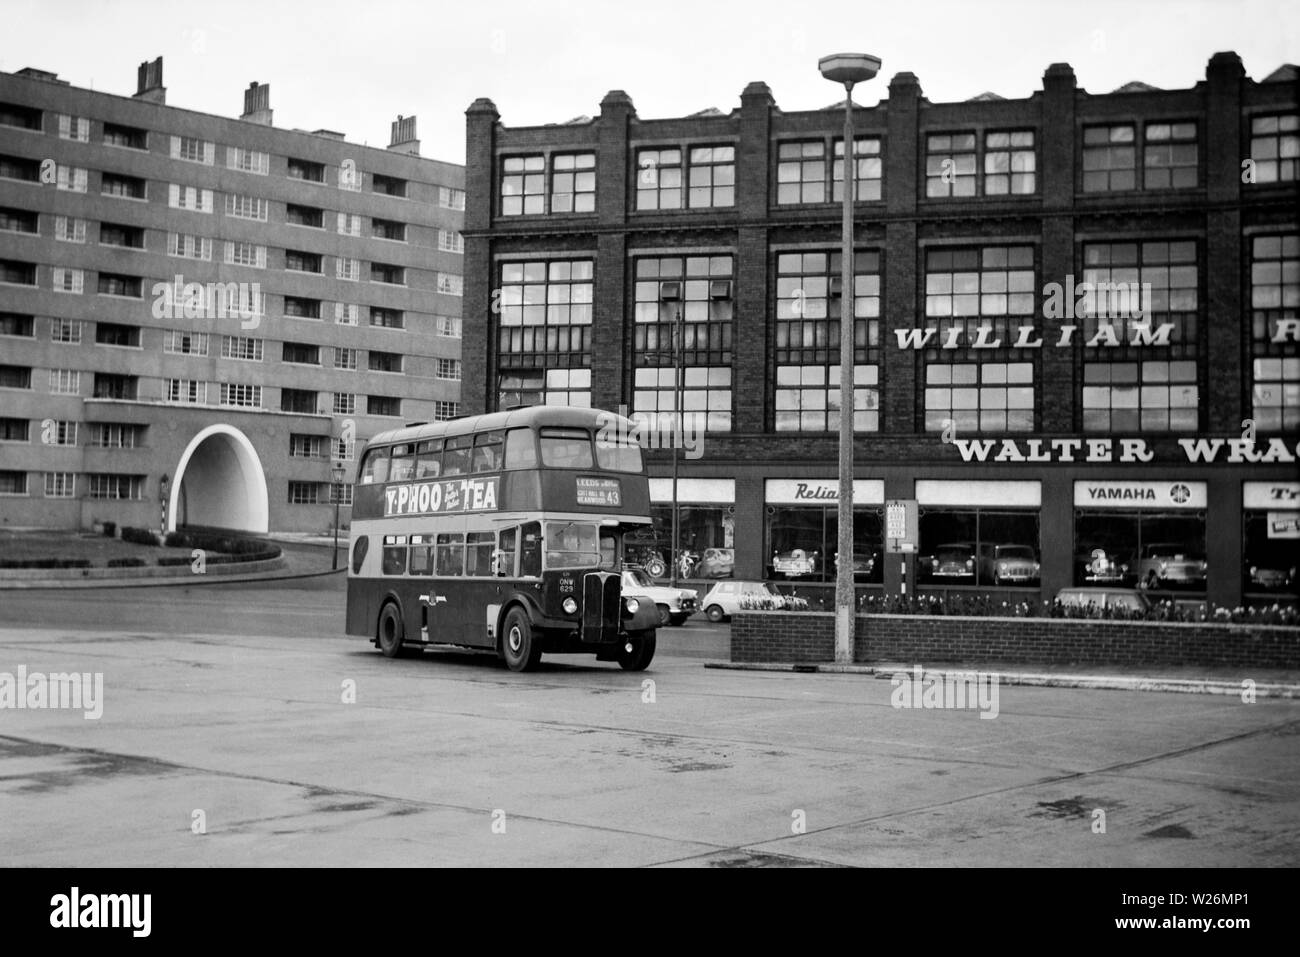 The cars on the right are in Duke Street. The factories dominating the background, right are William Read, Ltd, Wholesale costumiers and Walter Wragg Ltd. Motor Car Agents & Dealers, (Fiat), used car specialists, motor cycles, scooters and mopeds of Munro House, York Street. In the background left of centre the arched entrance to Priestley House, part of Quarry Hill flats is visible. Between 1938 and 1978 Quarry Hill was the location of what was at the time the largest social housing complex in the United Kingdom. Stock Photo